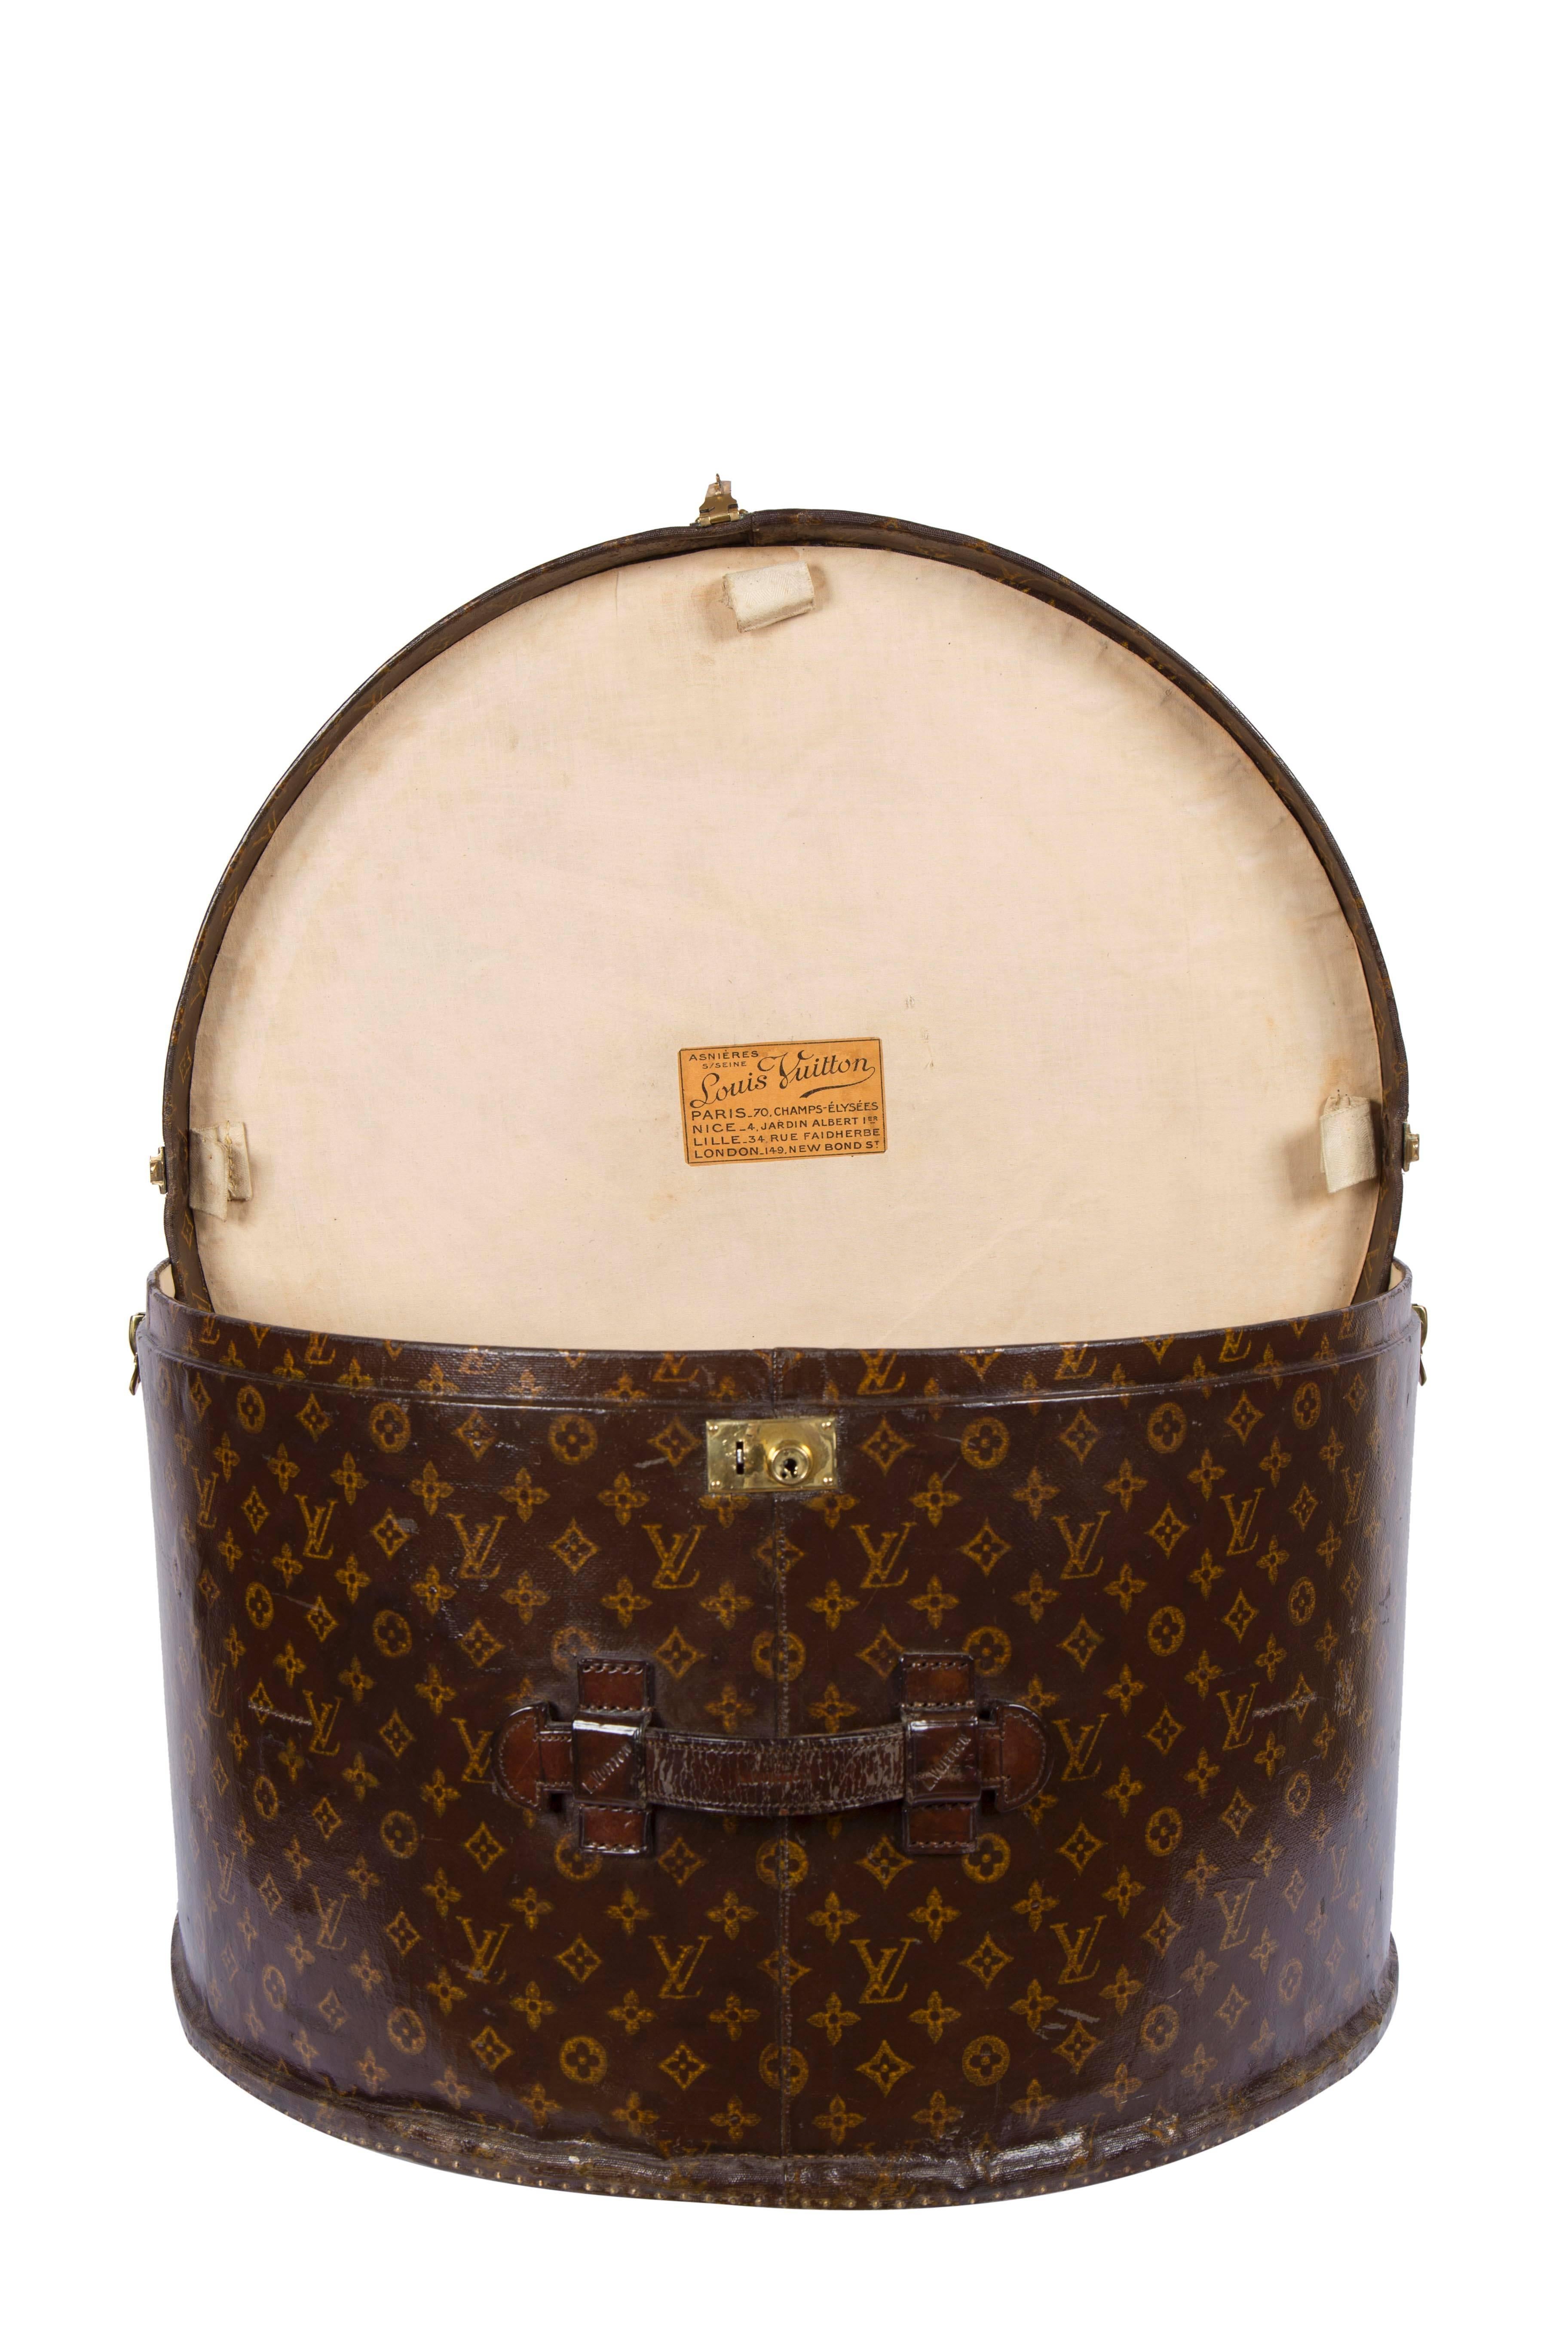 Louis Vuitton round hatbox in monogram canvas, circa 1920.  A custom ordered extra large hatbox with the initials H.B.E.  A hatbox of this size (23